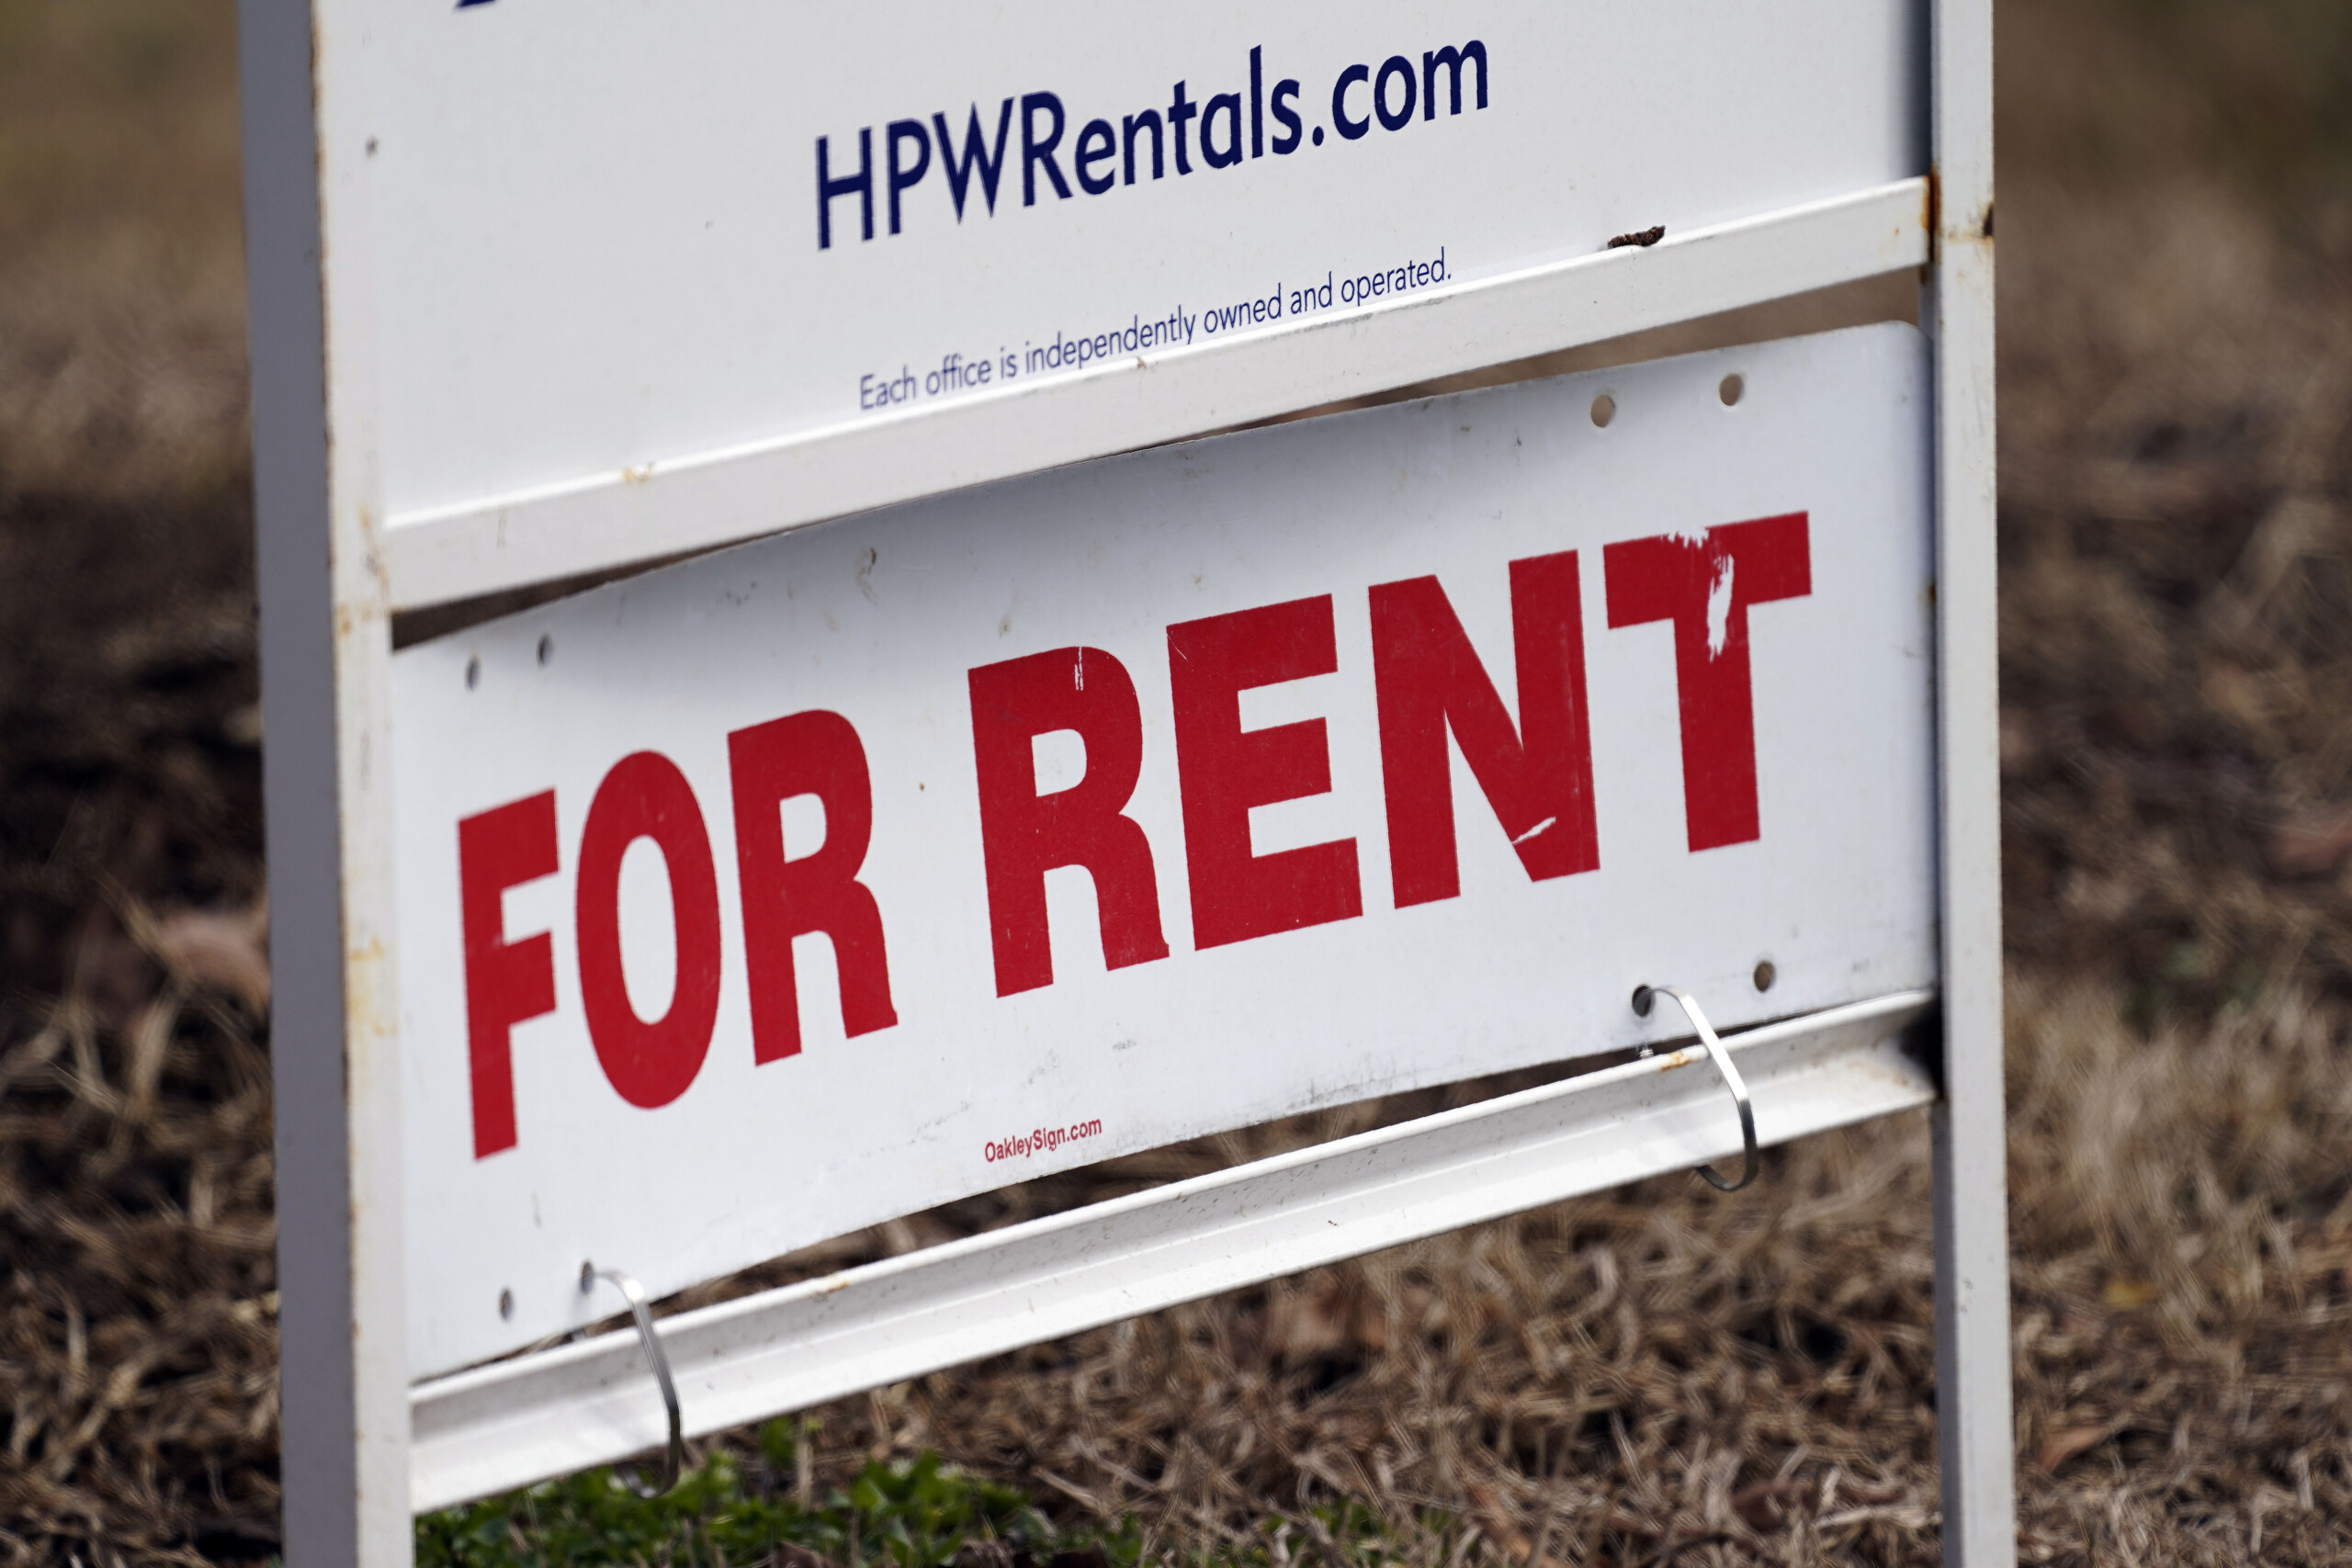 Rents are rising quickly in Jacksonville, but the price is still a bargain compared with other areas.